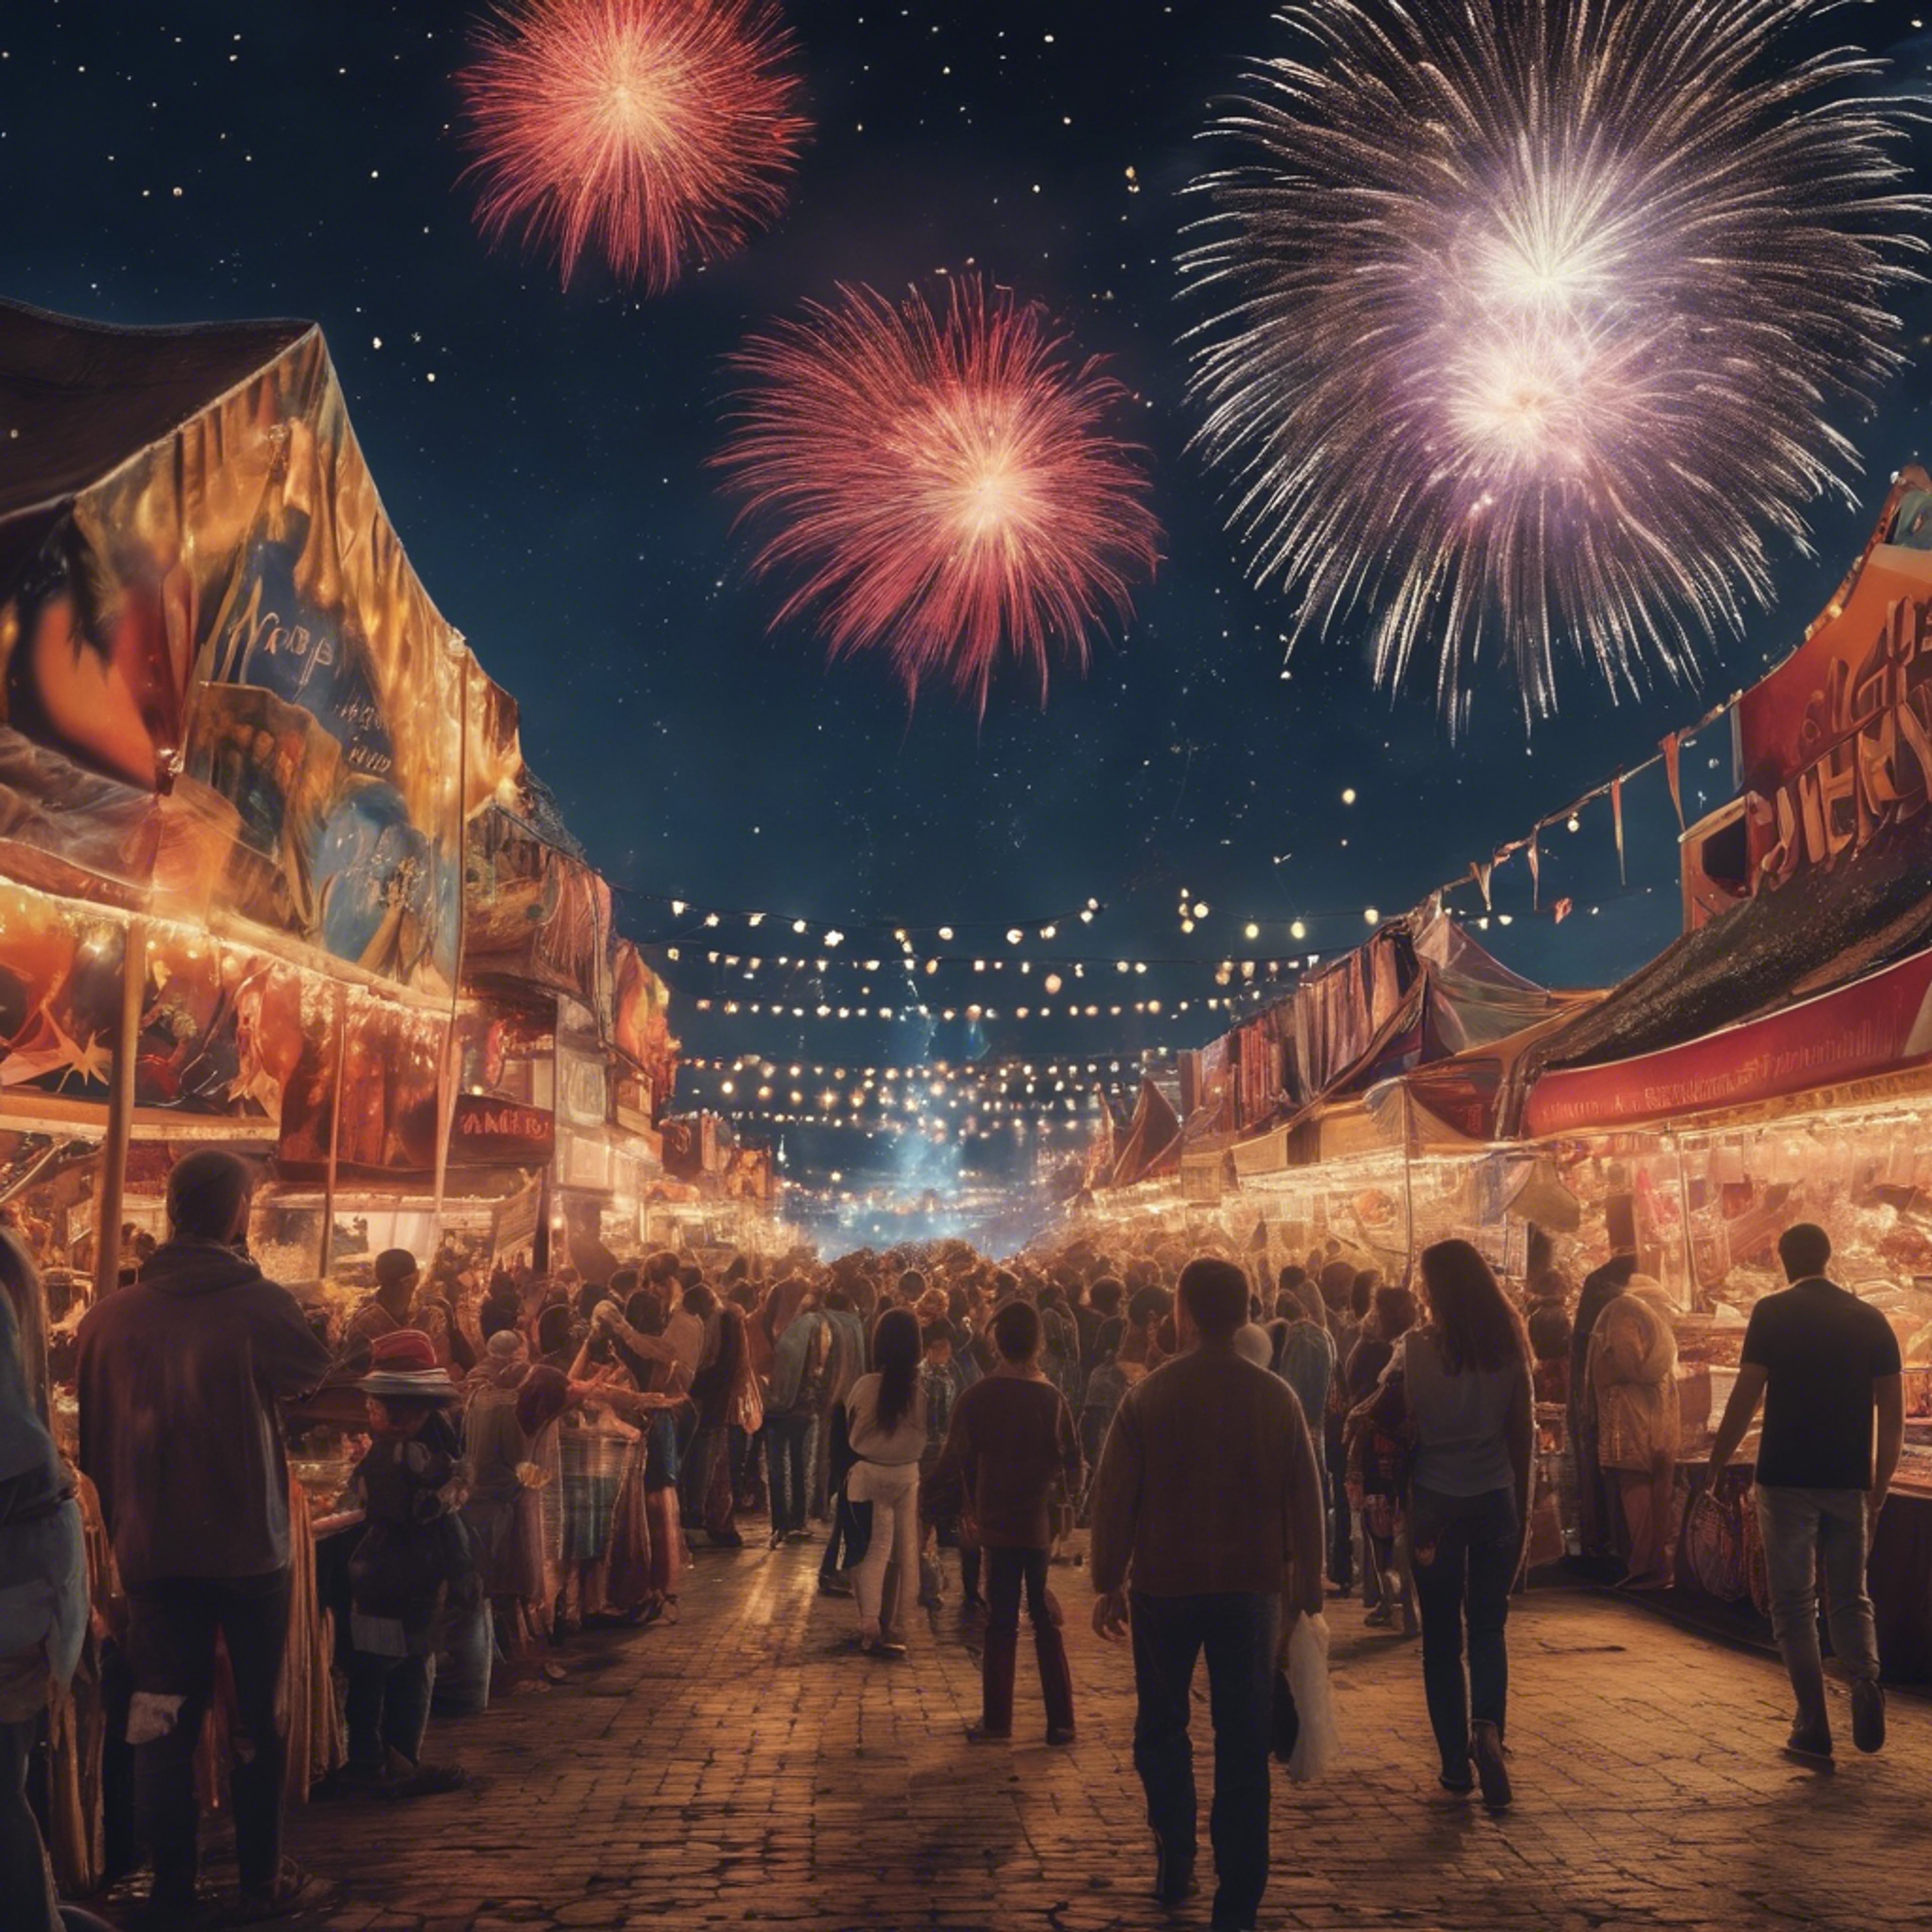 A vibrant scene of a street fair under a starry night sky with fireworks lighting up the horizon.壁紙[9a34b1dfd893402082d2]